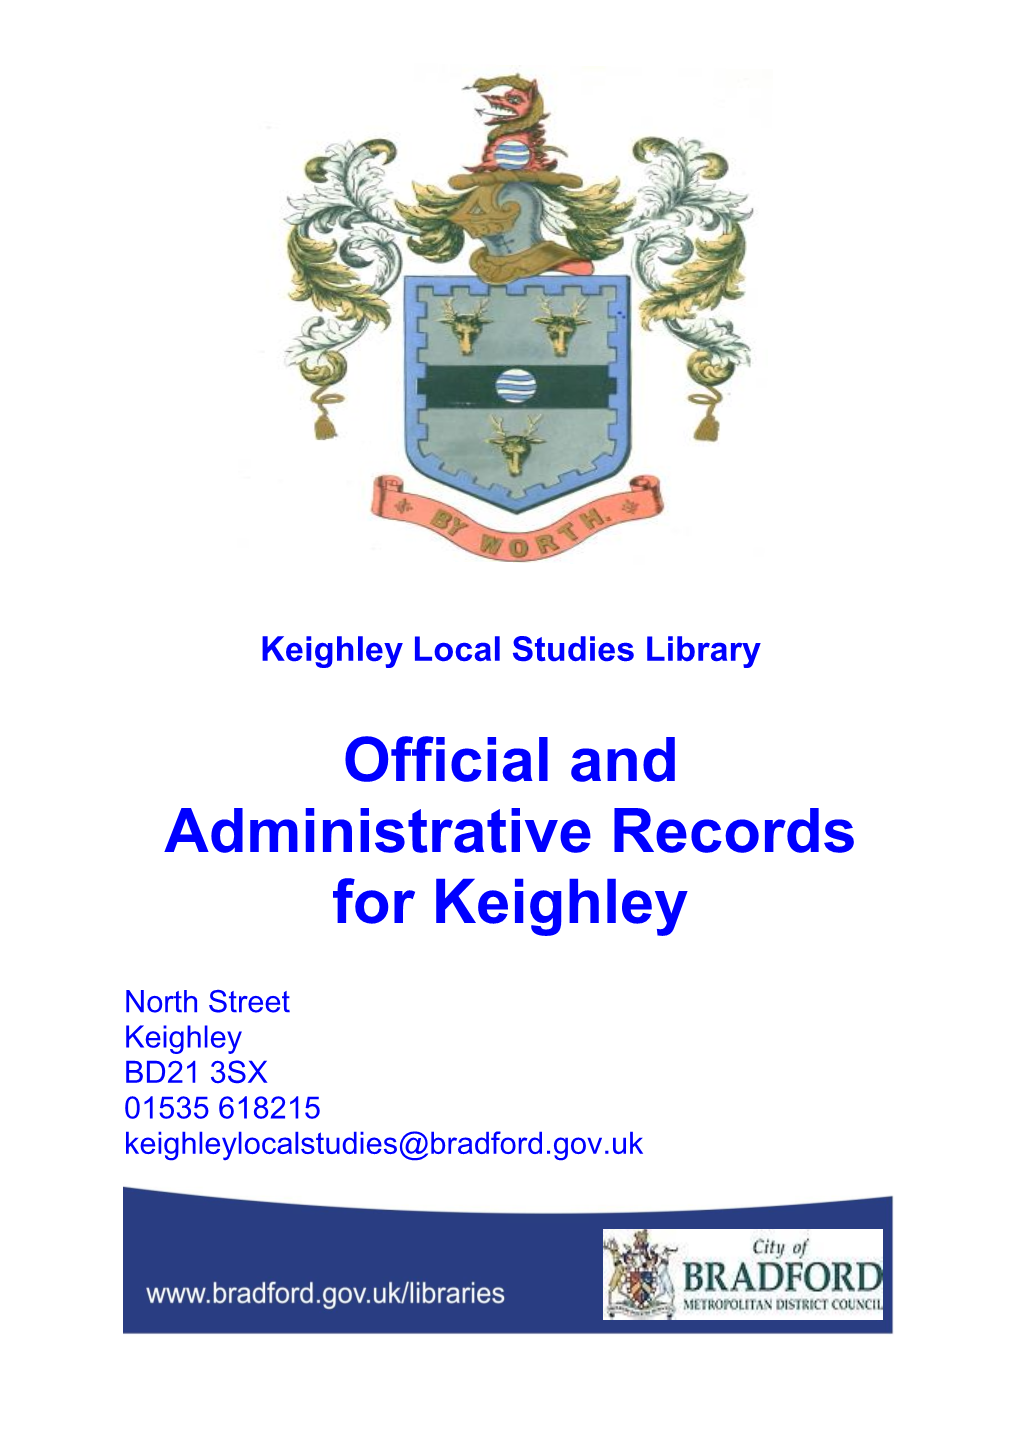 Official and Administrative Records for Keighley